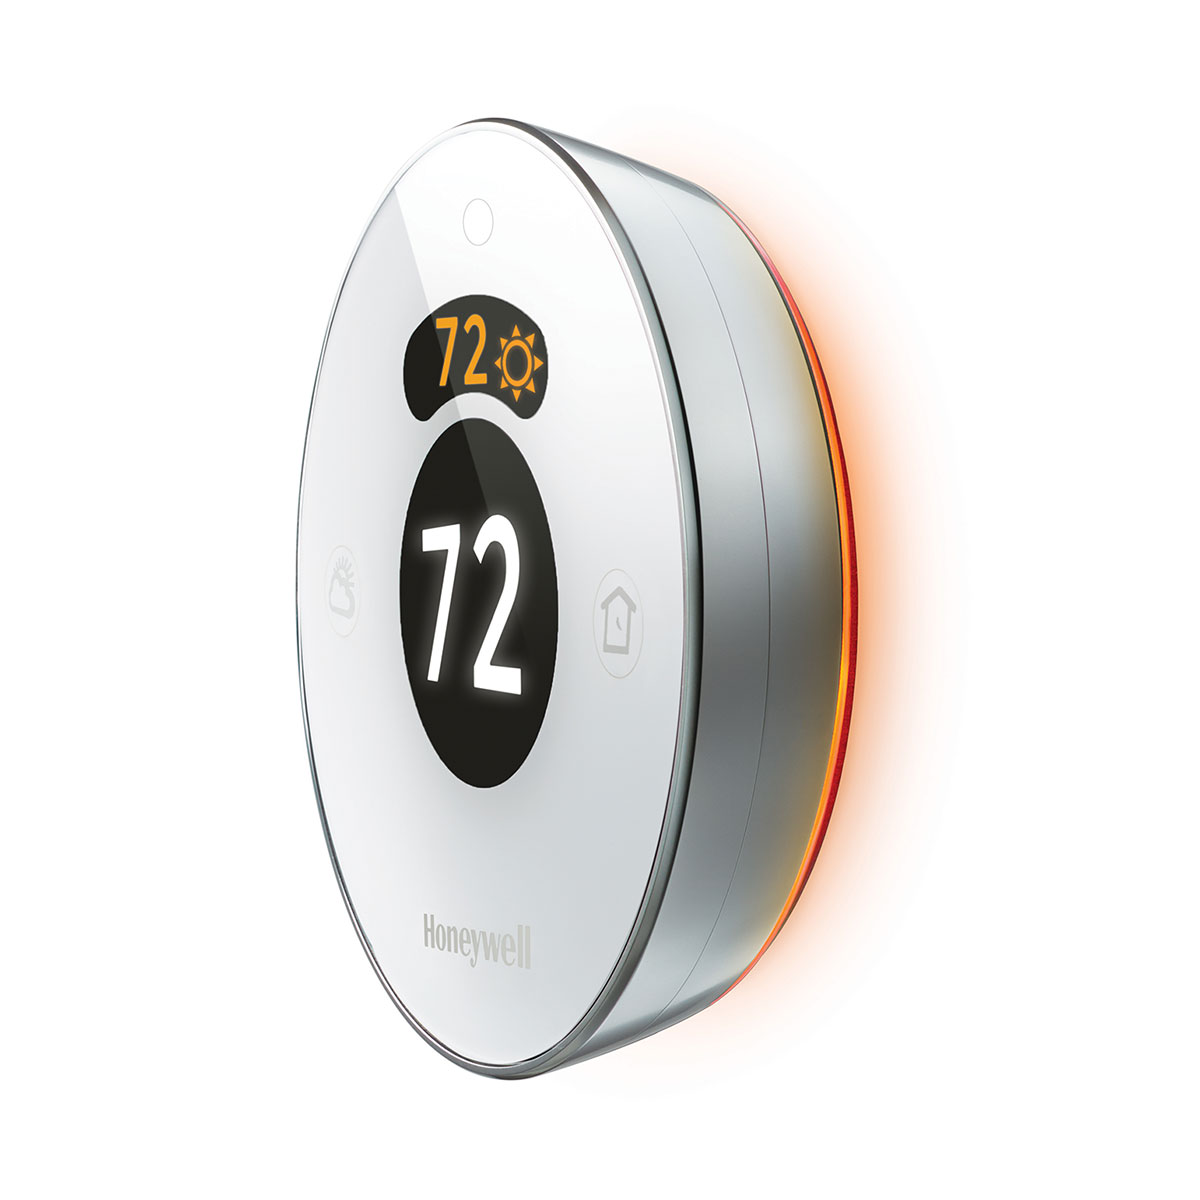 Honeywell Announces &#039;Lyric Round&#039; Wi-Fi Thermostat With Apple HomeKit Support